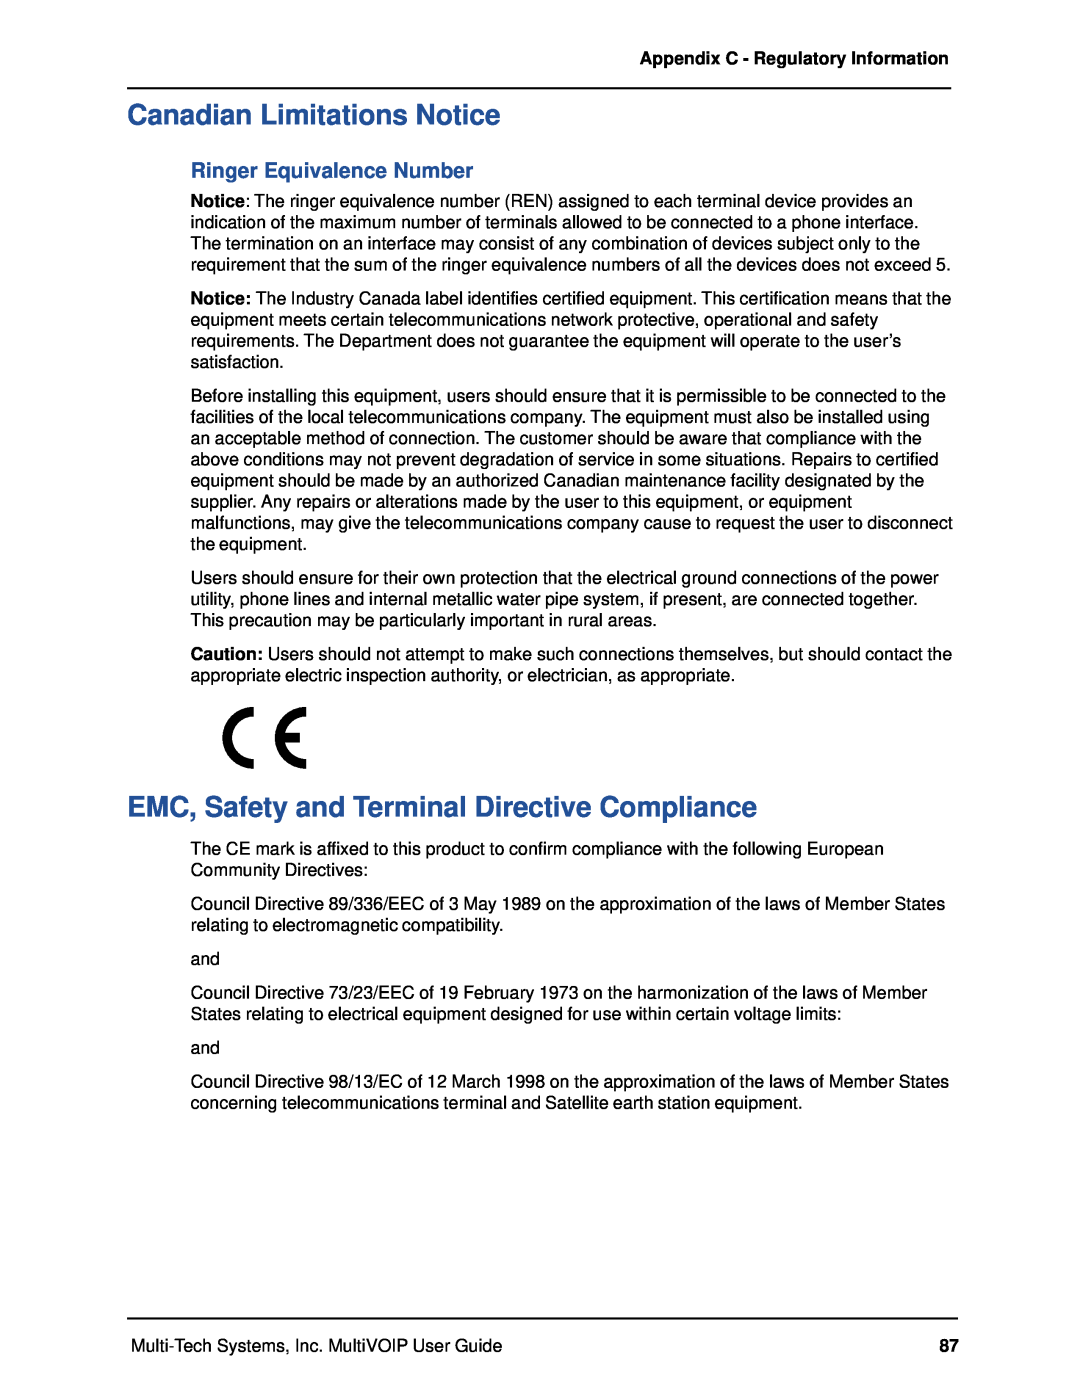 Multi-Tech Systems MVP120 manual Canadian Limitations Notice, EMC, Safety and Terminal Directive Compliance 